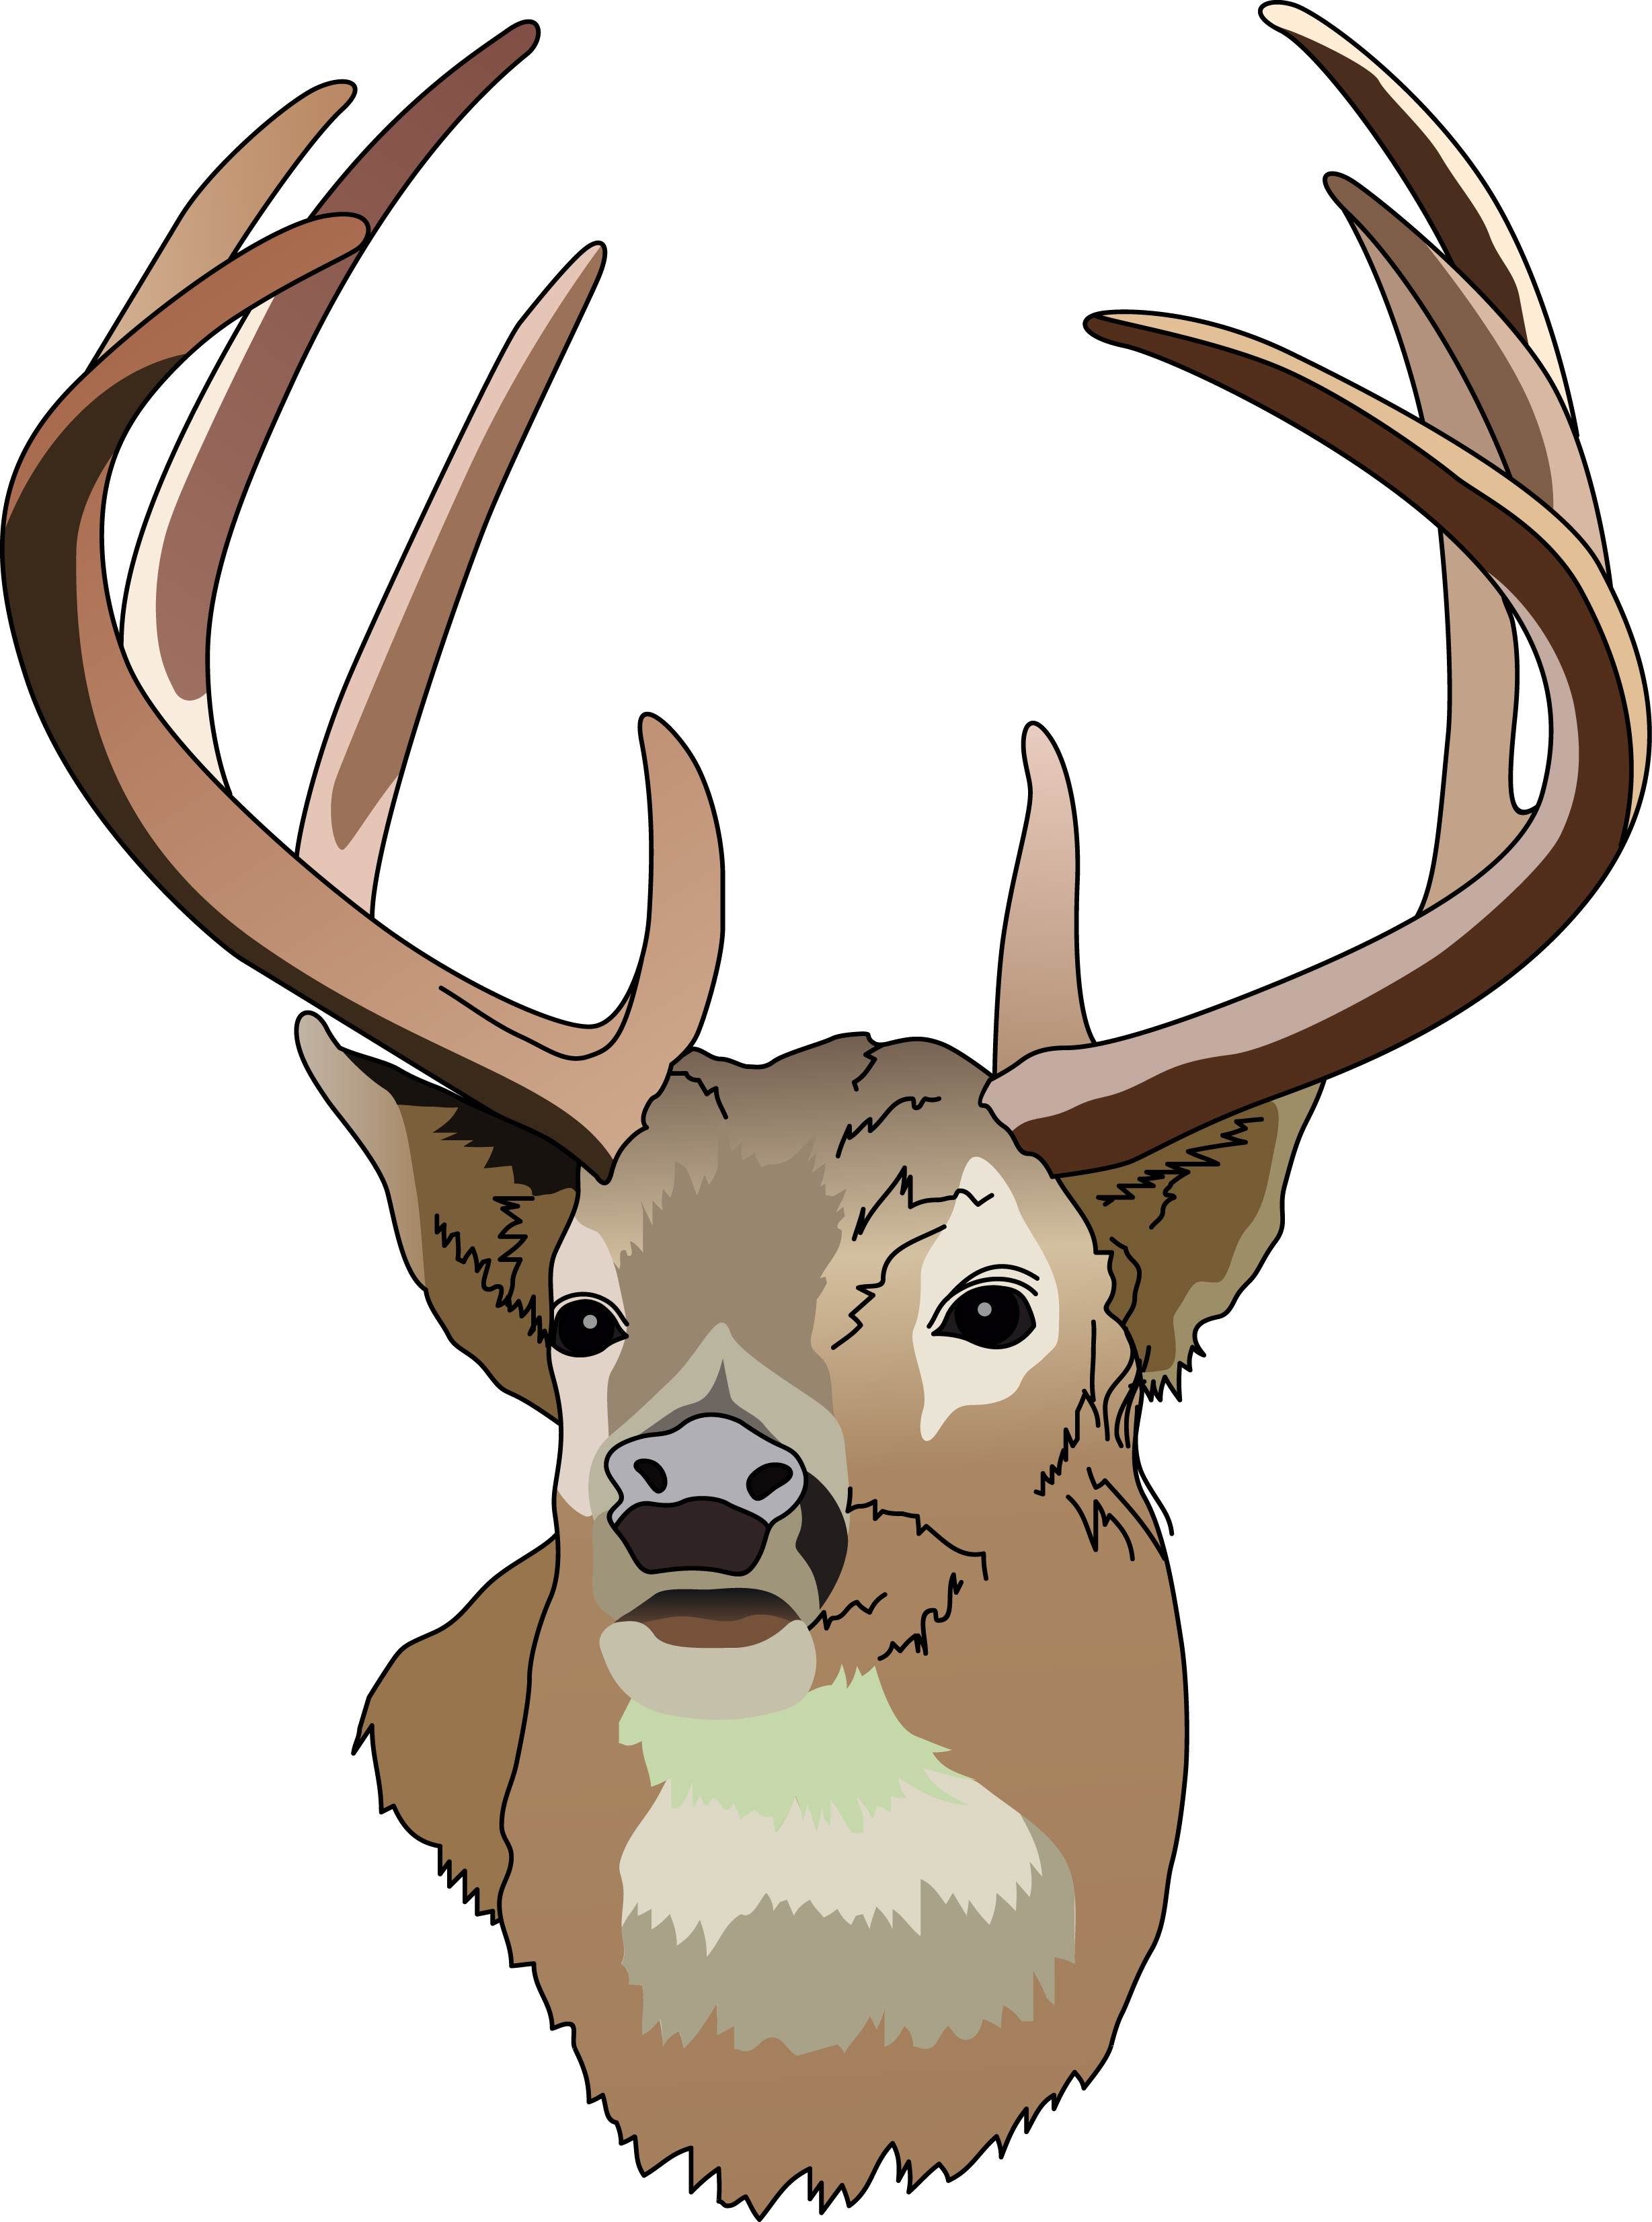 17 Deer Art Pictures Free Cliparts That You Can Download To You